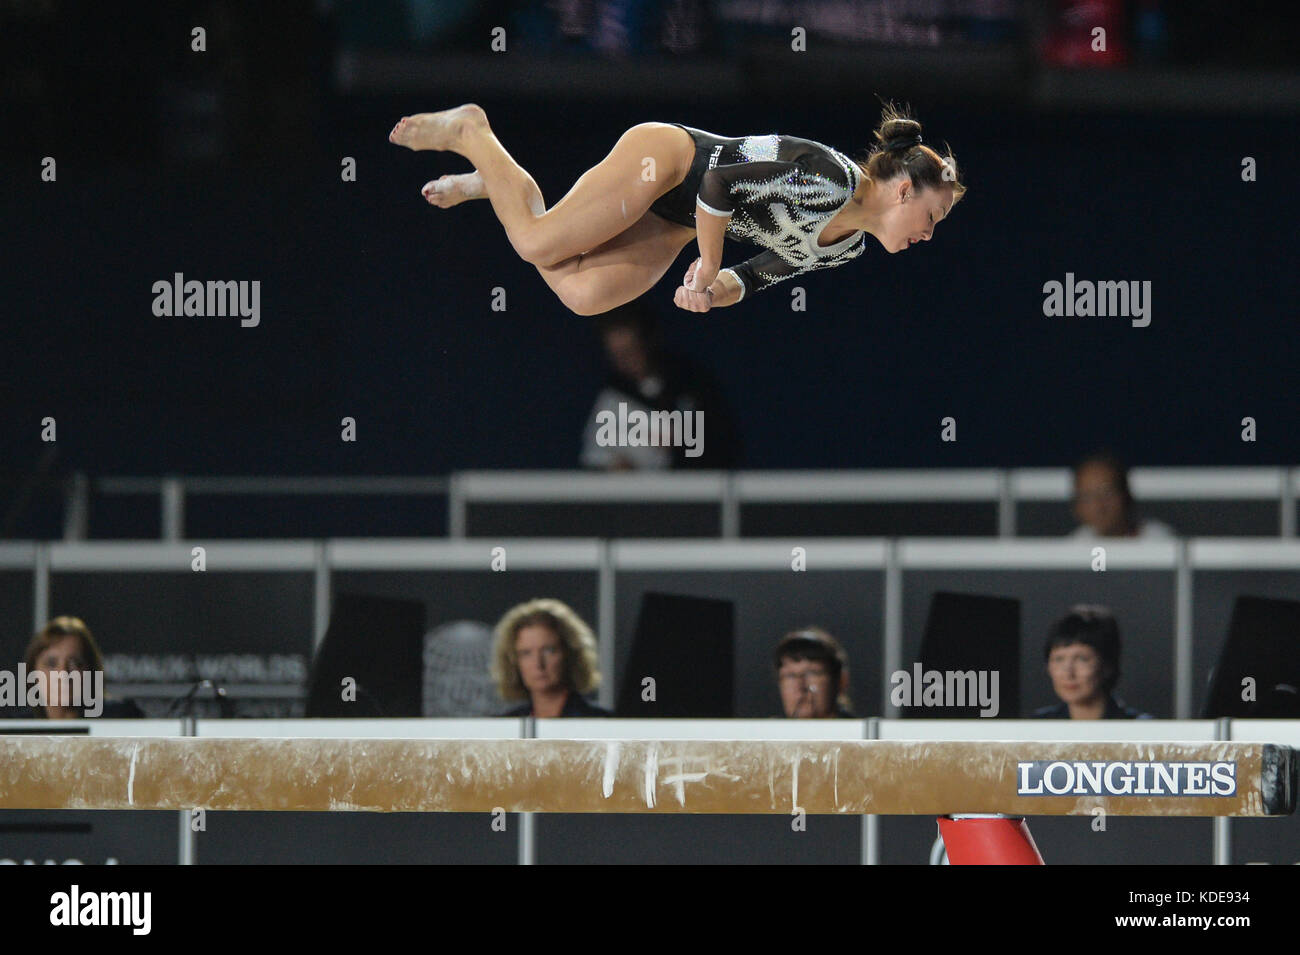 October 4, 2017 - Montreal, Quebec, Canada - VANESSA FERRARI, from Italy, competes on the balance beam during the third day of qualifying competition held at the Olympic Stadium in Montreal, Quebec. (Credit Image: © Amy Sanderson via ZUMA Wire) Stock Photo